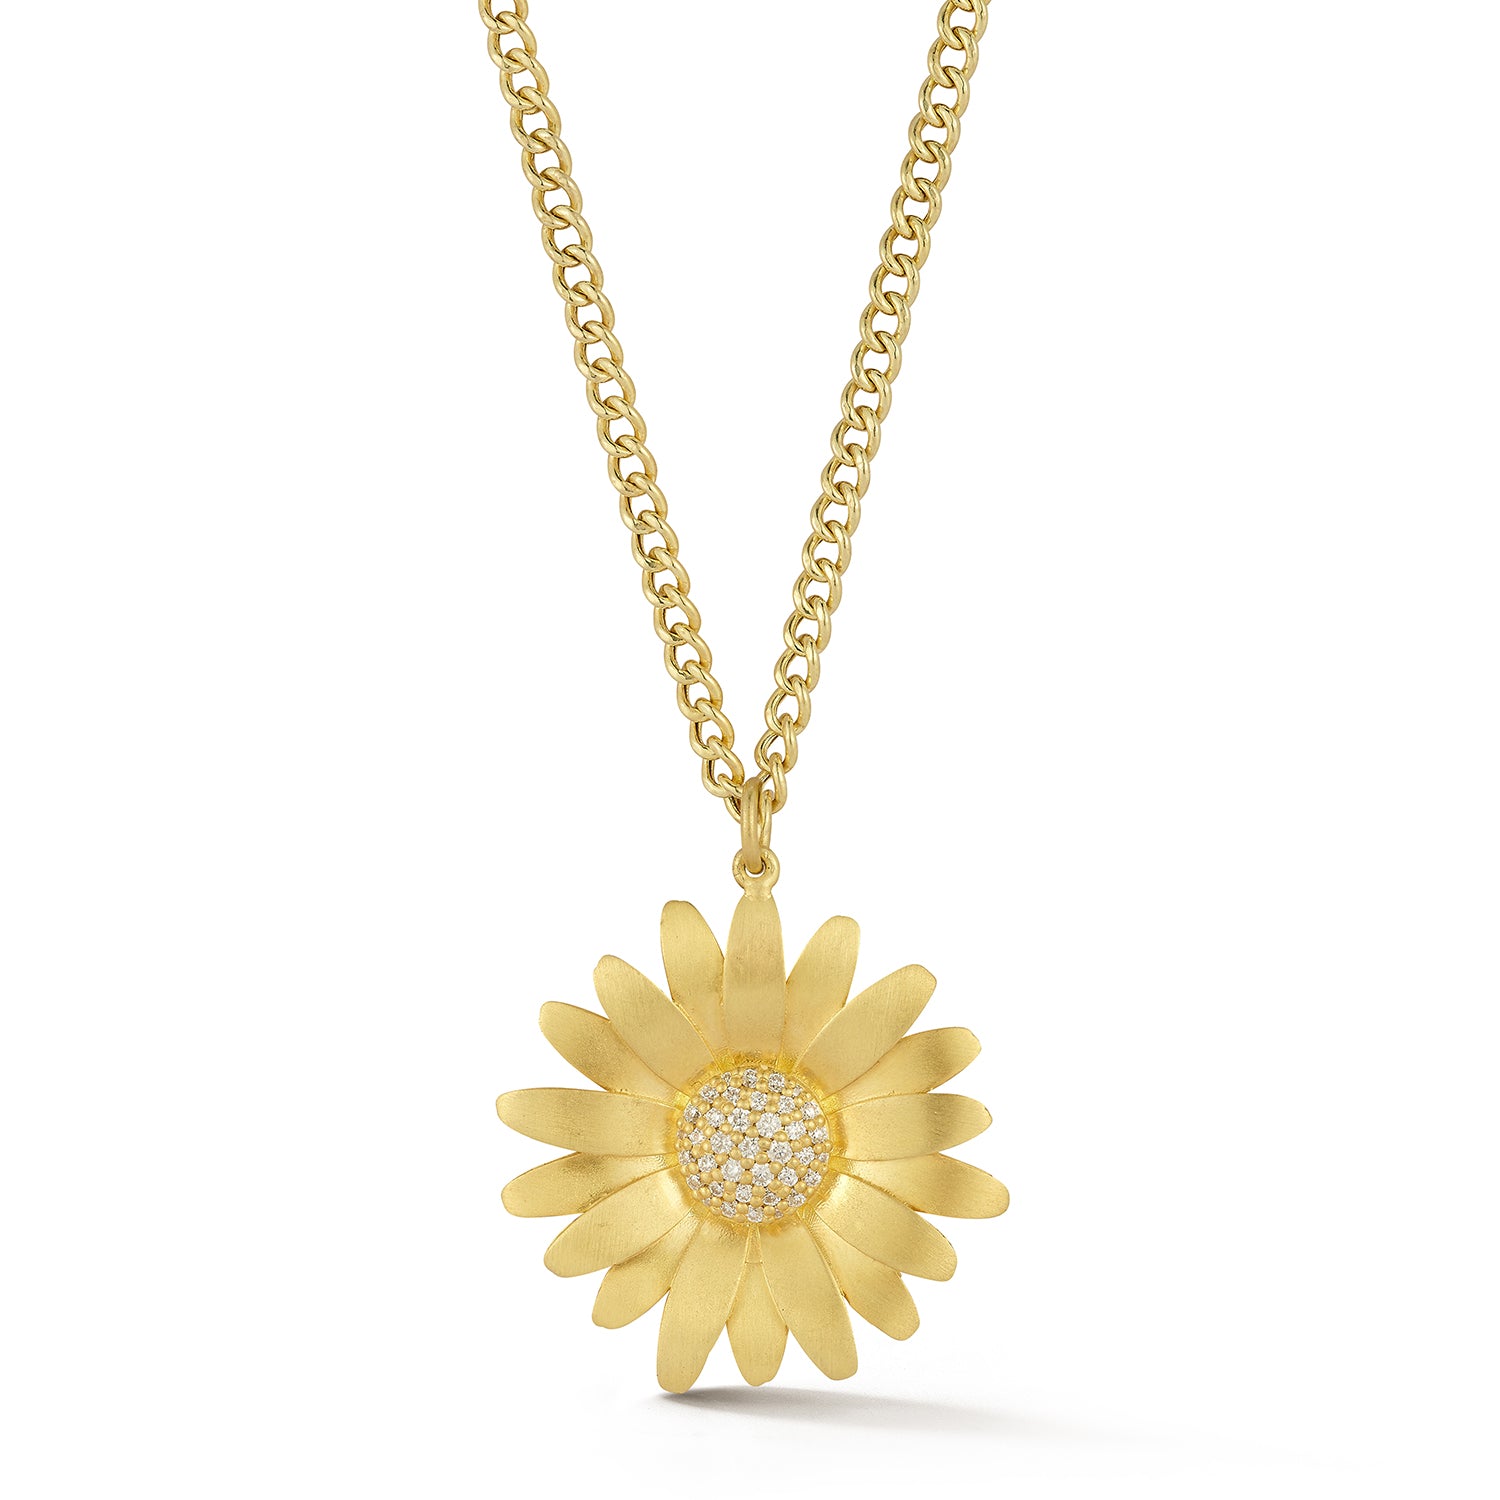 Large Gold Daisy Necklace with Diamonds